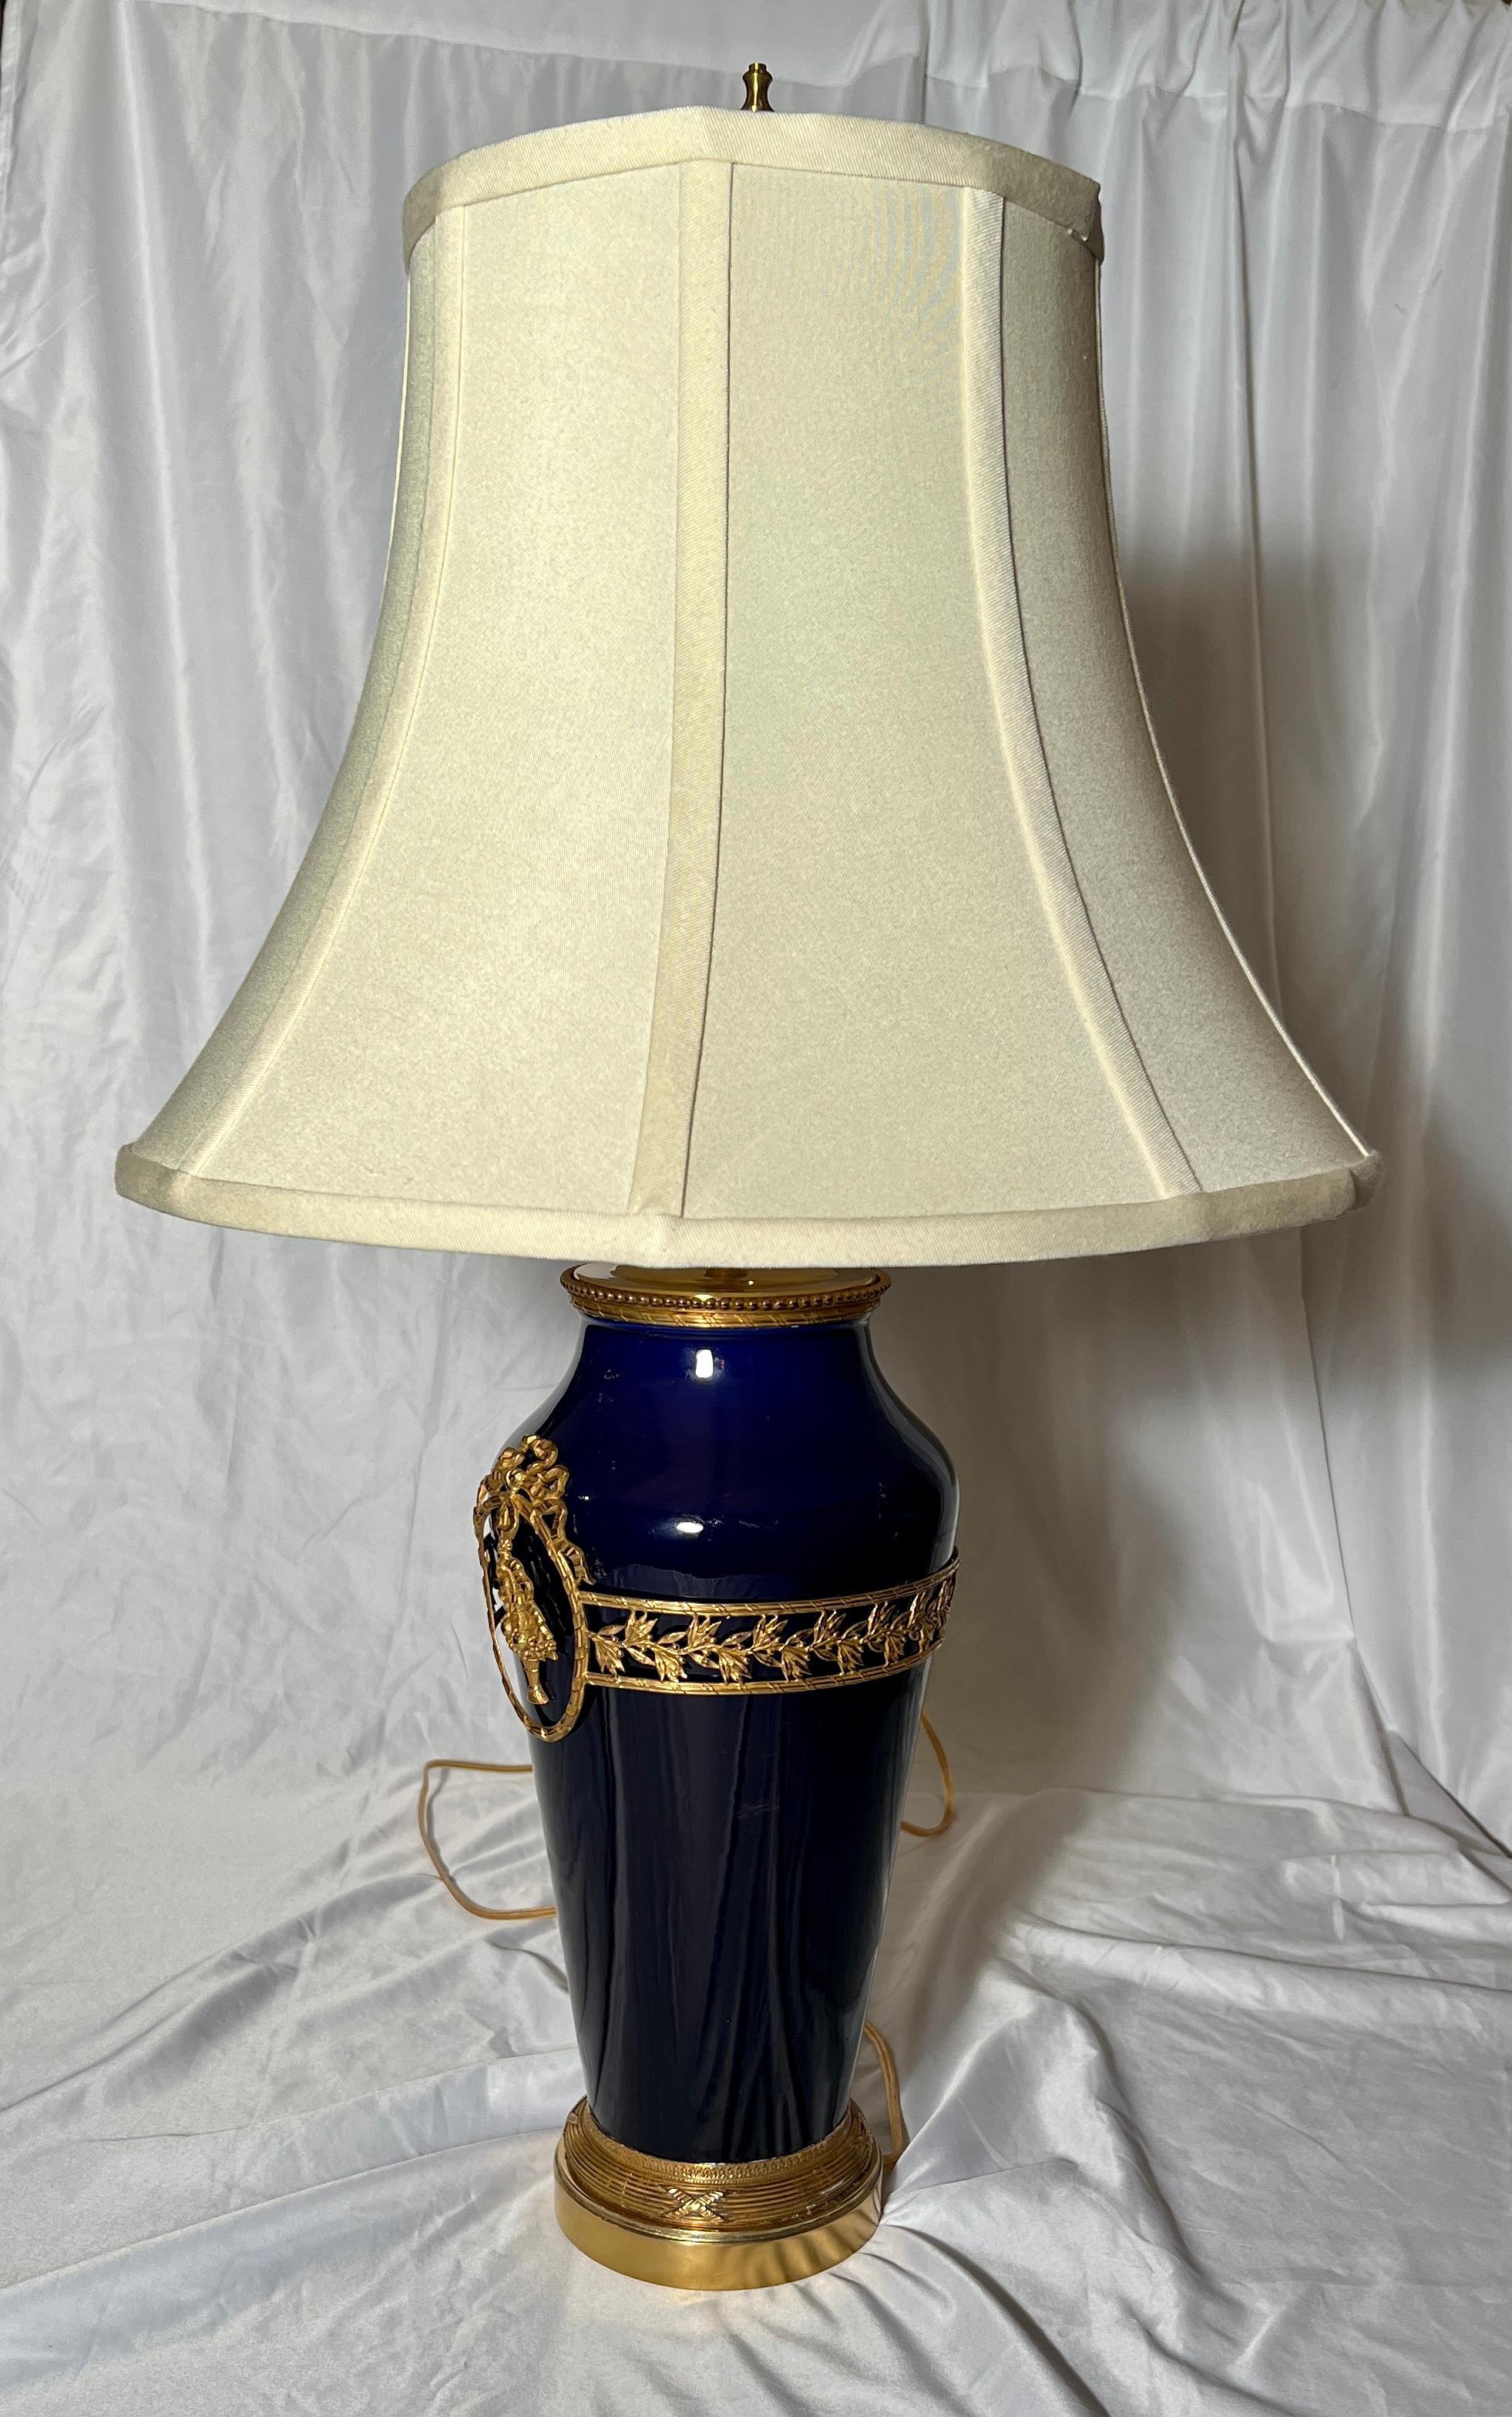 Pair Antique French Ormolu and Cobalt Blue Enameled Porcelain Lamps, Circa 1890  In Good Condition For Sale In New Orleans, LA